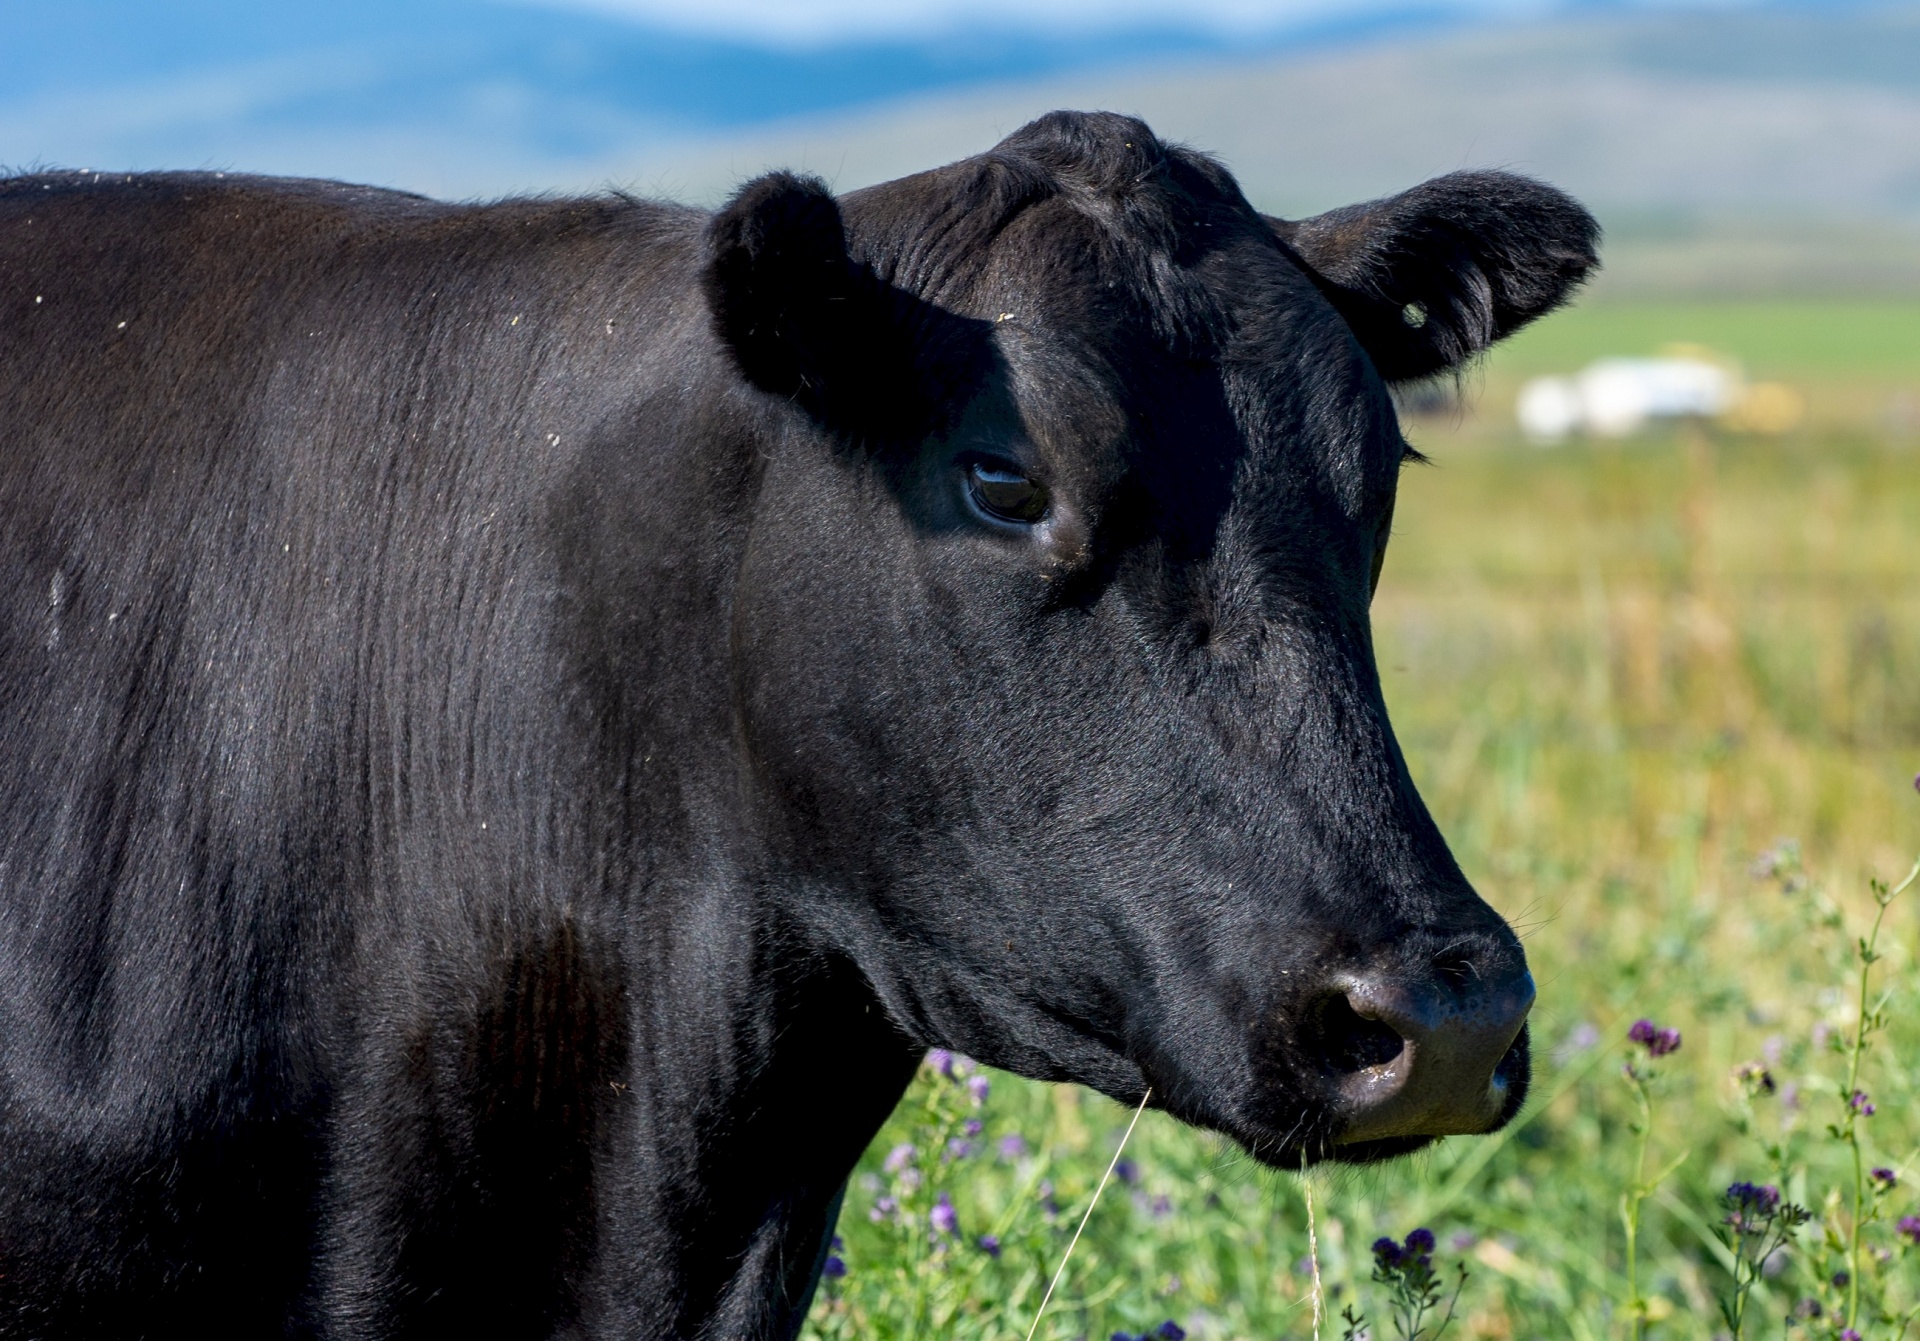 Angus Cattle Breed